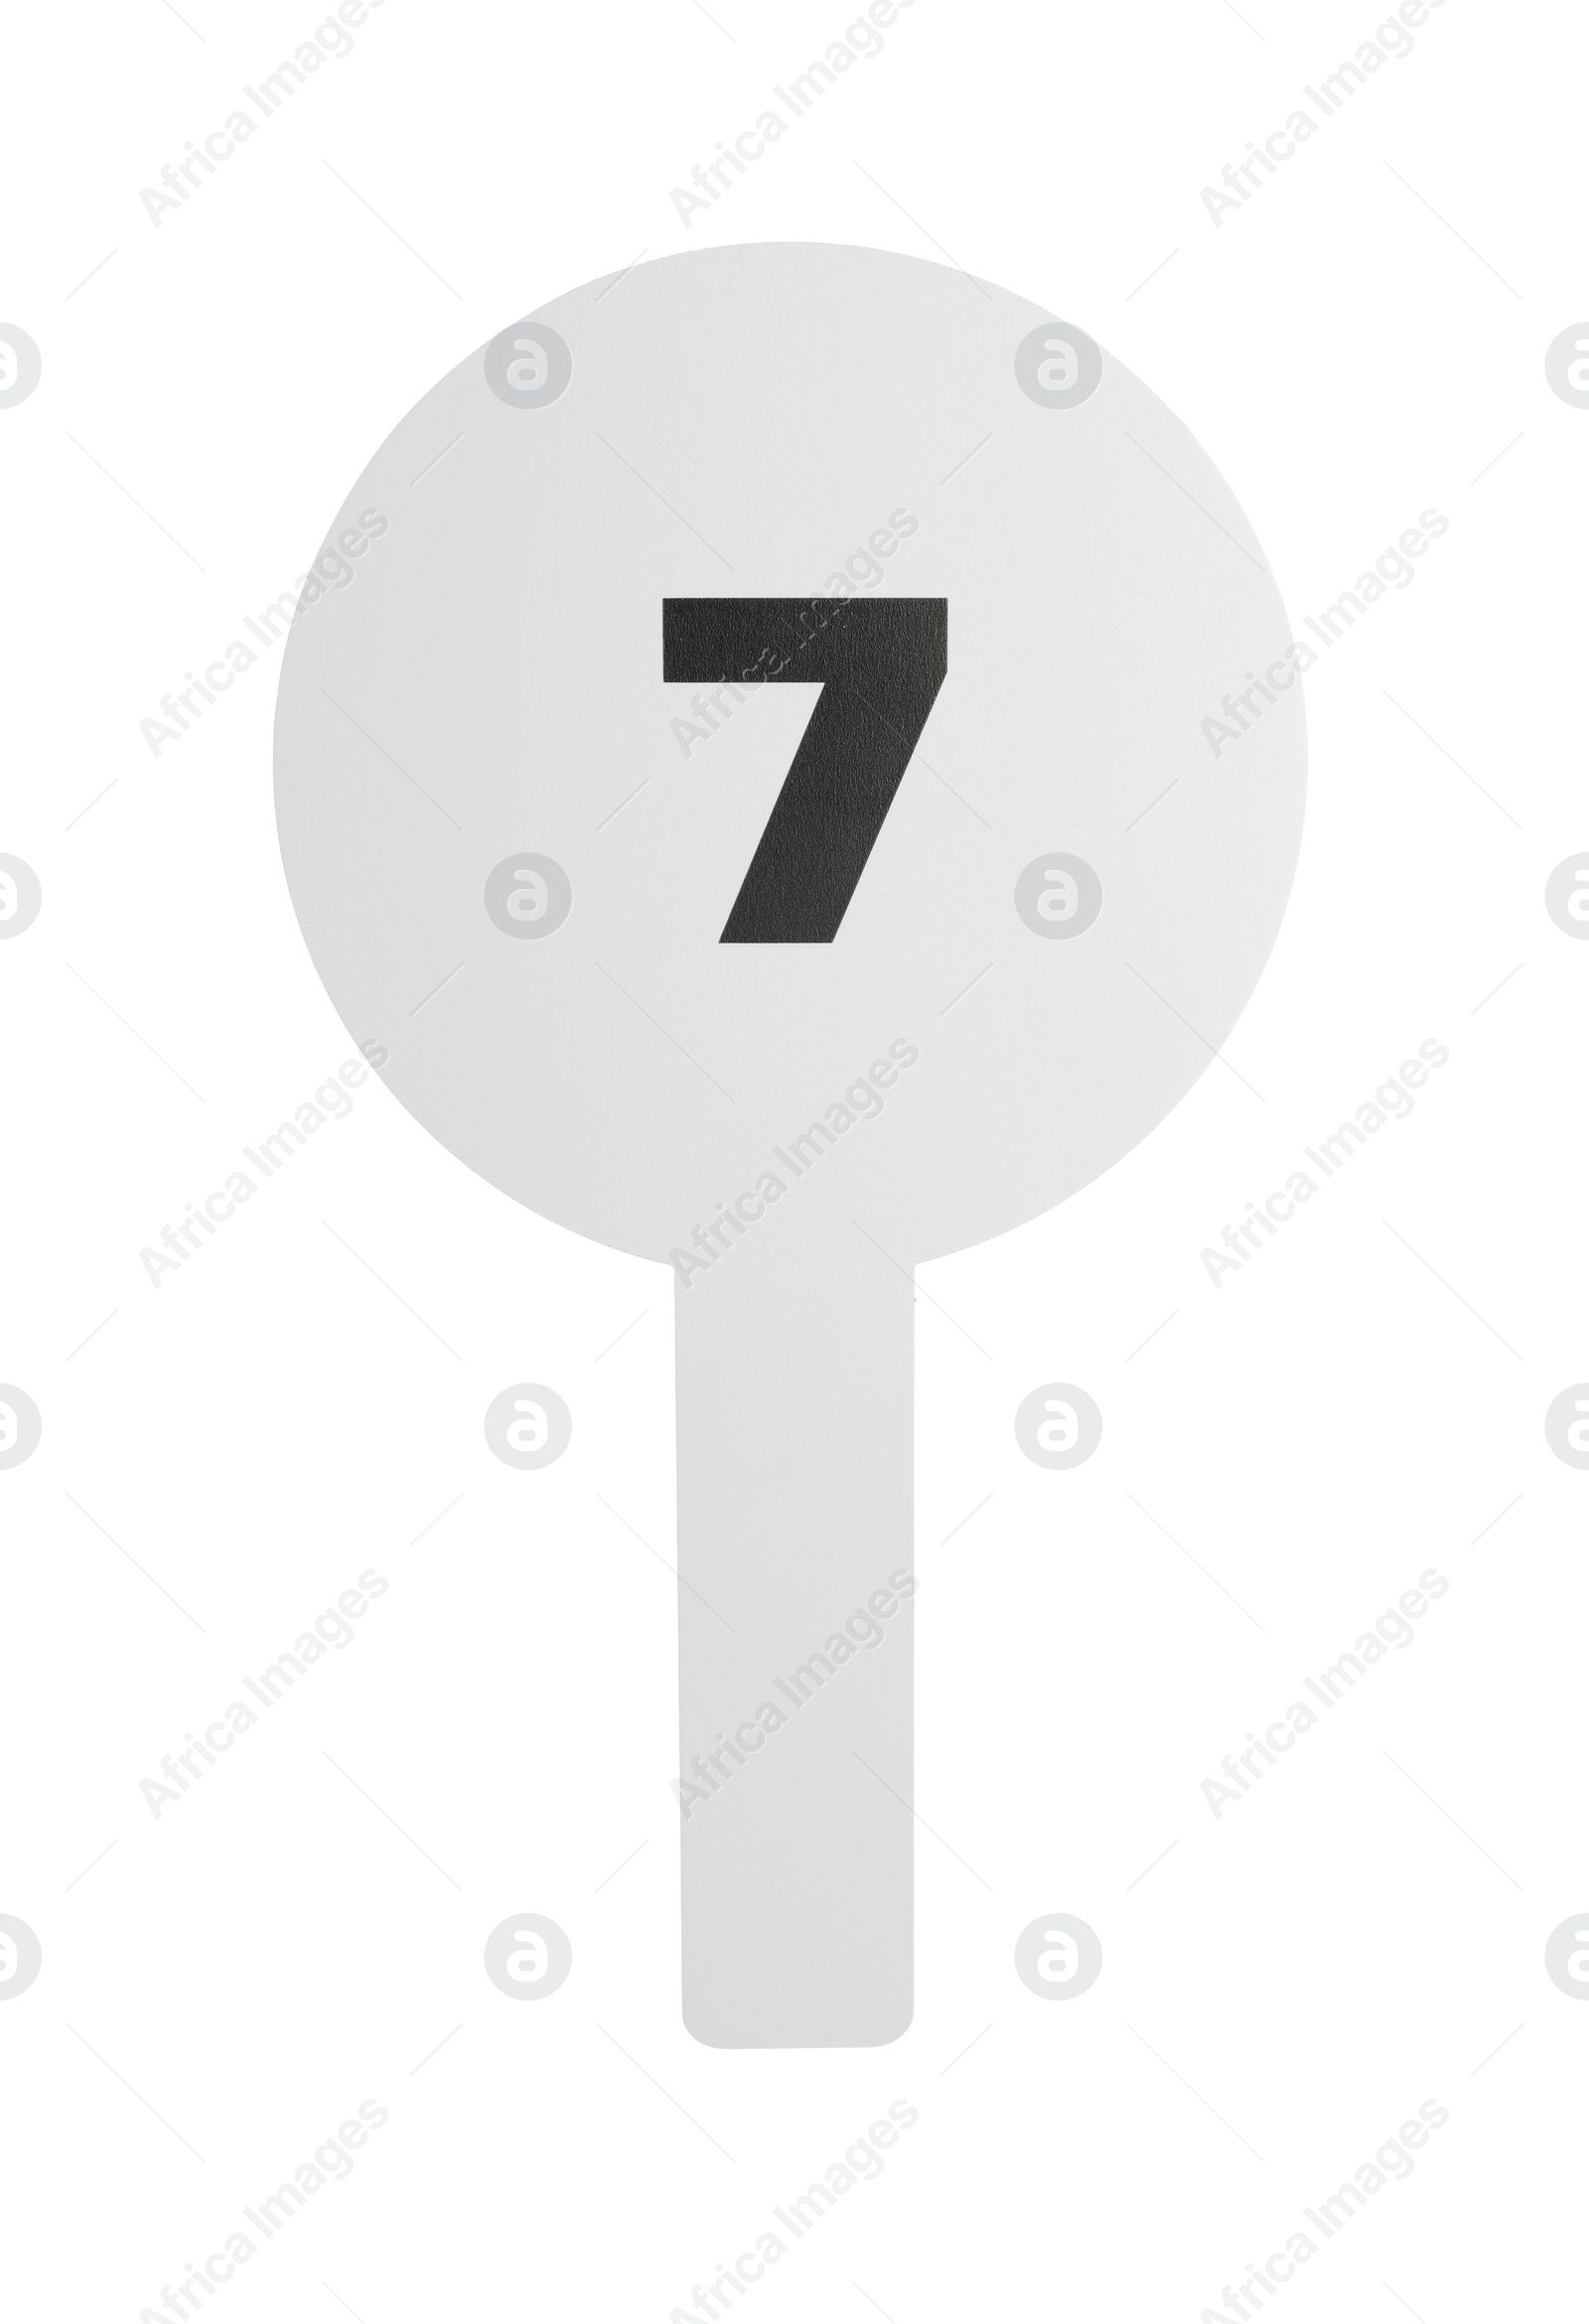 Photo of Auction paddle with number 7 isolated on white